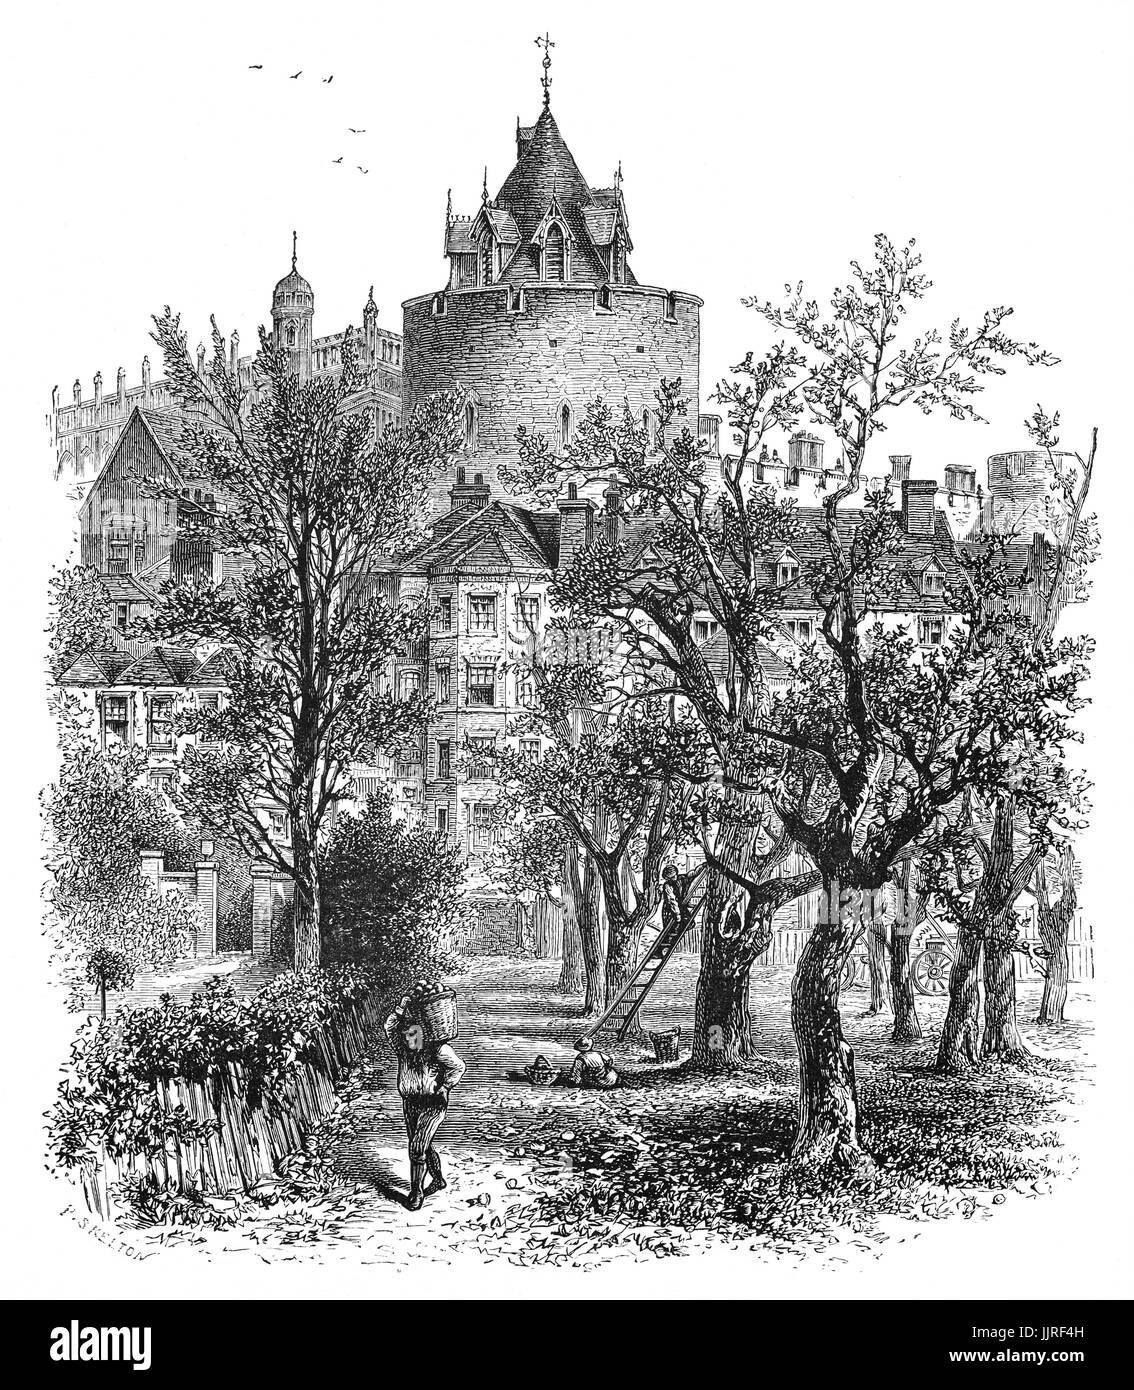 1870: Apple Orchard in front of the Curfew Tower, built in the 1220s by Henry III. In 1477, Edward IV granted the tower to the College of St George  as a belfry and a great timber frame was erected within it to house the bells and clock mechanism. The College bells and clock have hung here ever since. Windsor Castle, Berkshire, England Stock Photo